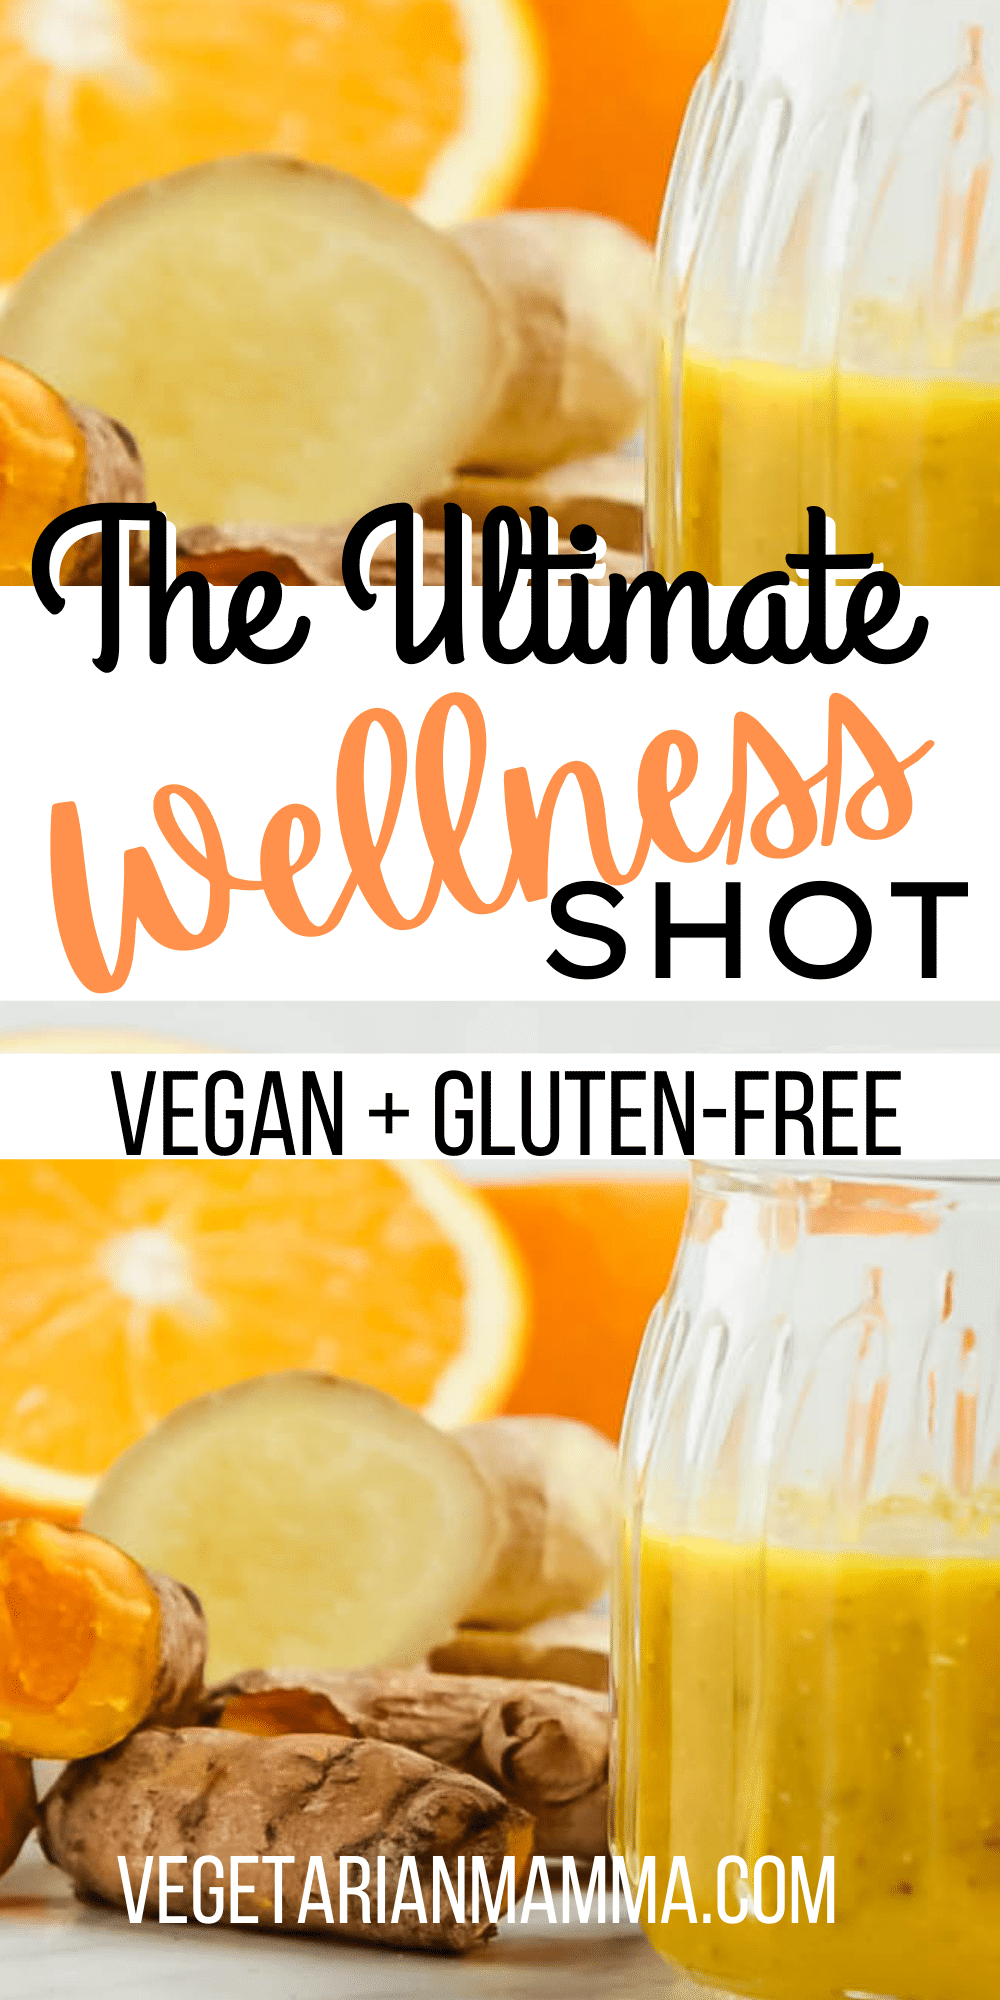 An easy Wellness Shot recipe is made in your blender with just 5 ingredients. This flavorful juice has anti-inflammatory benefits, vitamin C, and chia seeds for an all-day energy bonus.